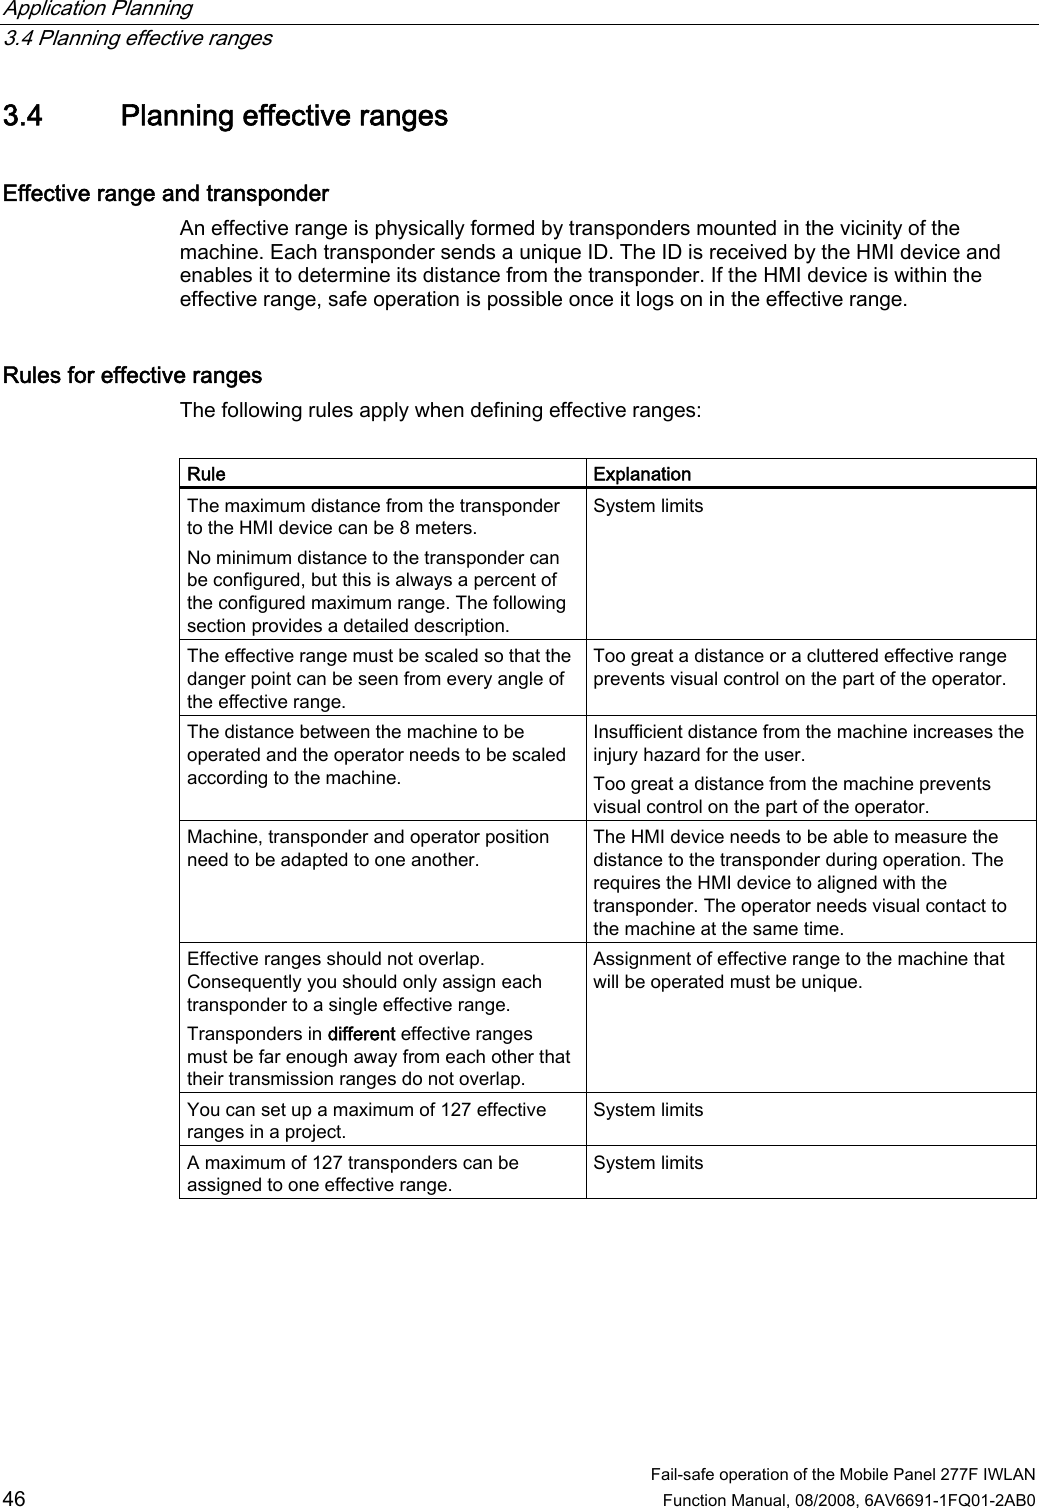 Application Planning   3.4 Planning effective ranges  Fail-safe operation of the Mobile Panel 277F IWLAN  46 Function Manual, 08/2008, 6AV6691-1FQ01-2AB0 3.4 Planning effective ranges Effective range and transponder An effective range is physically formed by transponders mounted in the vicinity of the machine. Each transponder sends a unique ID. The ID is received by the HMI device and enables it to determine its distance from the transponder. If the HMI device is within the effective range, safe operation is possible once it logs on in the effective range. Rules for effective ranges The following rules apply when defining effective ranges:  Rule  Explanation The maximum distance from the transponder to the HMI device can be 8 meters.  No minimum distance to the transponder can be configured, but this is always a percent of the configured maximum range. The following section provides a detailed description. System limits The effective range must be scaled so that the danger point can be seen from every angle of the effective range. Too great a distance or a cluttered effective range prevents visual control on the part of the operator. The distance between the machine to be operated and the operator needs to be scaled according to the machine. Insufficient distance from the machine increases the injury hazard for the user. Too great a distance from the machine prevents visual control on the part of the operator. Machine, transponder and operator position need to be adapted to one another. The HMI device needs to be able to measure the distance to the transponder during operation. The requires the HMI device to aligned with the transponder. The operator needs visual contact to the machine at the same time. Effective ranges should not overlap. Consequently you should only assign each transponder to a single effective range. Transponders in different effective ranges must be far enough away from each other that their transmission ranges do not overlap. Assignment of effective range to the machine that will be operated must be unique. You can set up a maximum of 127 effective ranges in a project. System limits A maximum of 127 transponders can be assigned to one effective range. System limits 